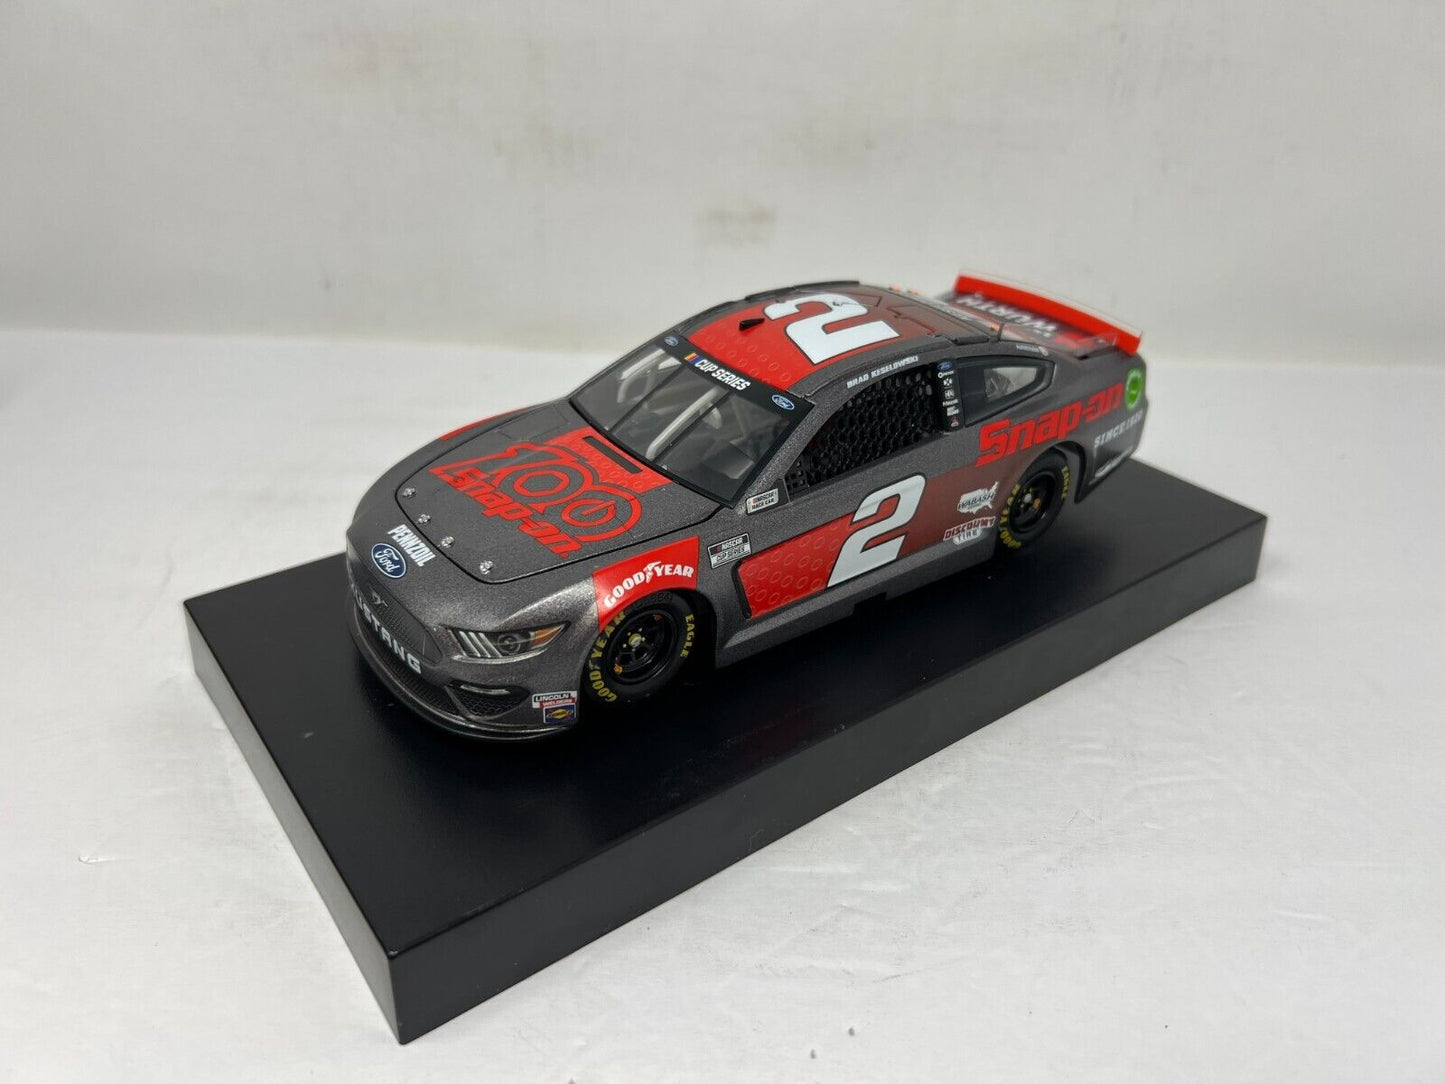 Lionel Racing Nascar #2 Brad Keselowski Snap-On Tools Ford Mustang 1:24 Diecast